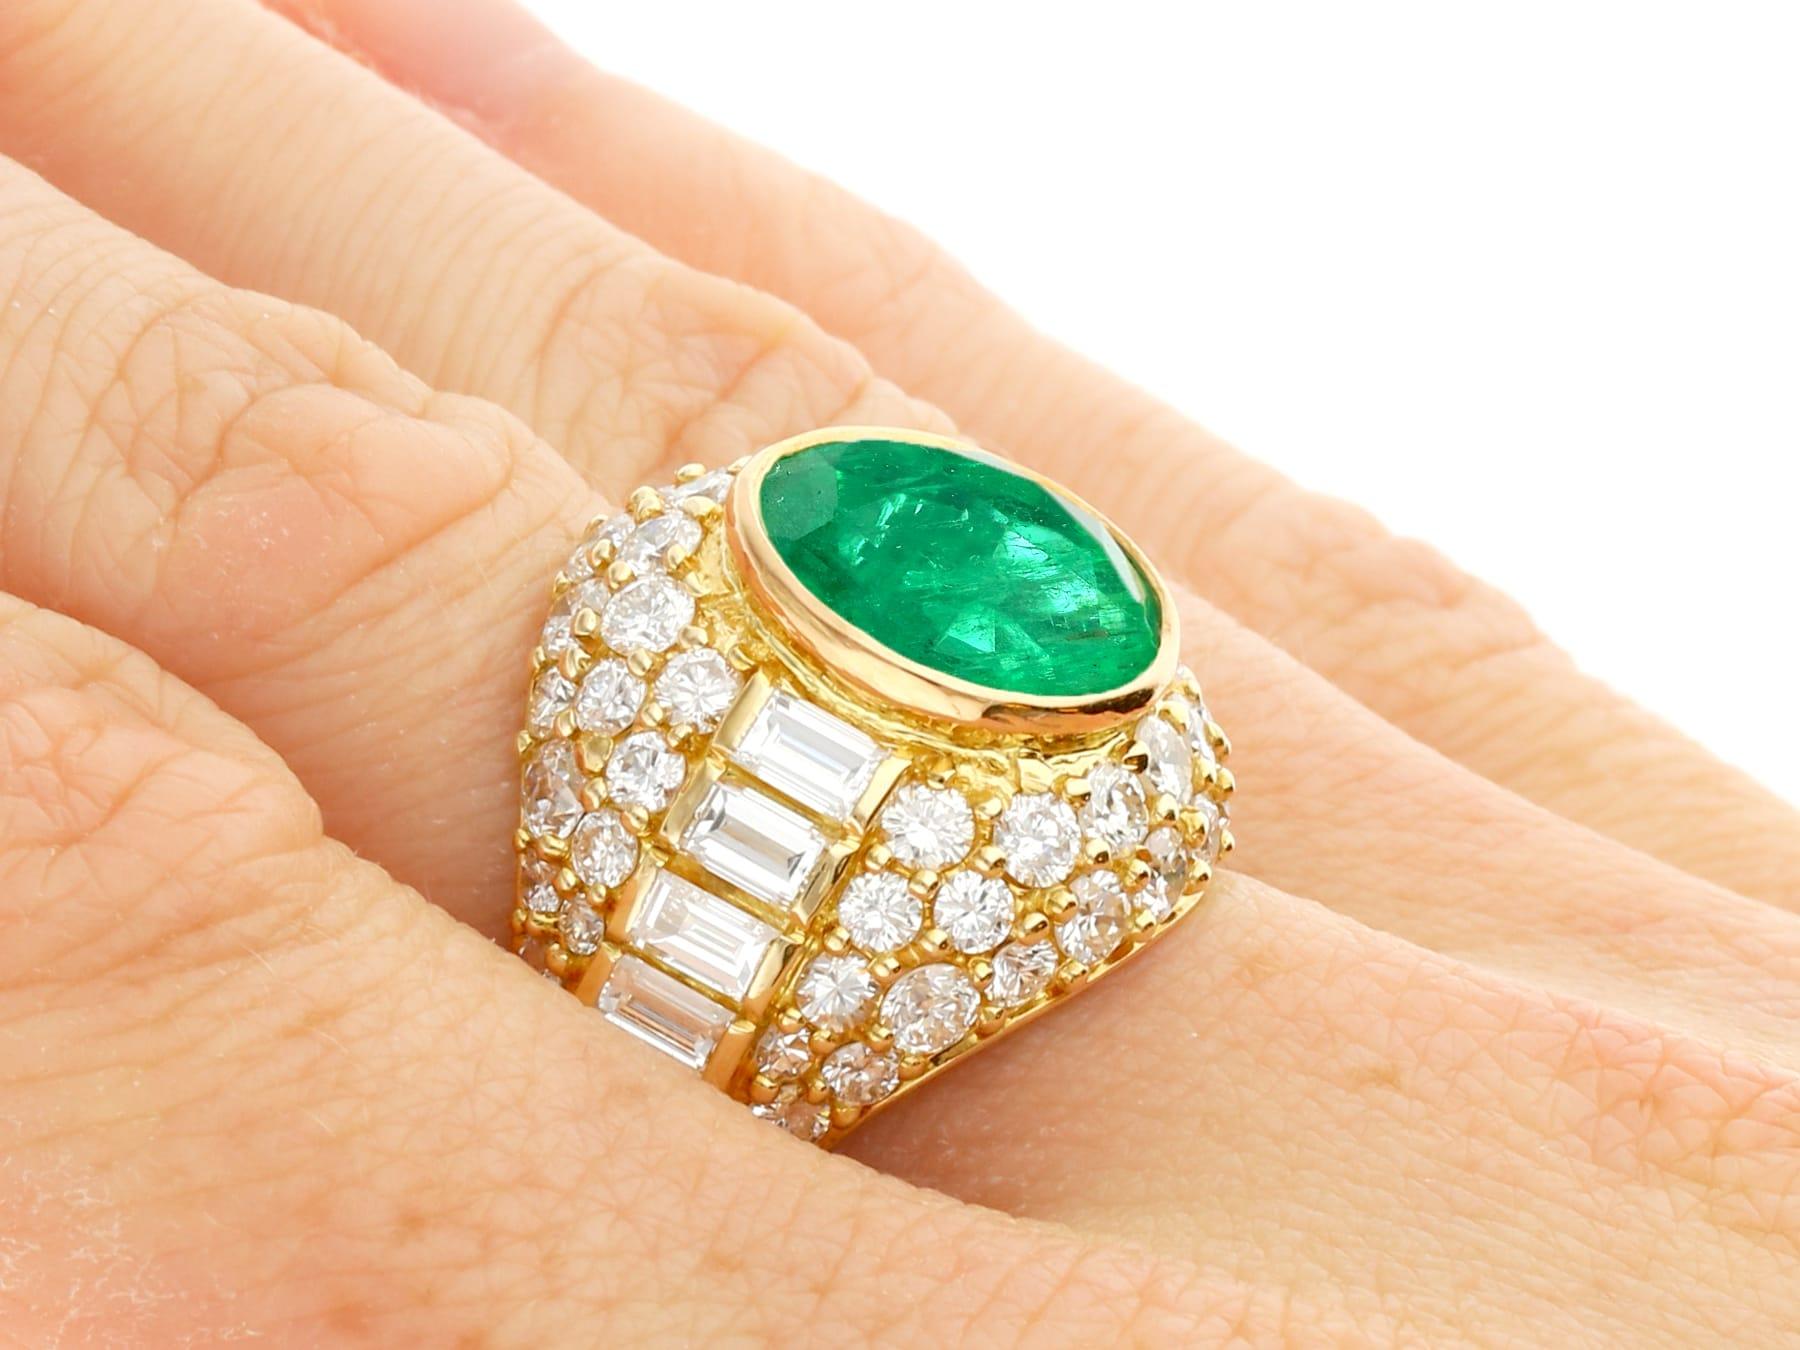 Vintage 5.12ct Colombian Emerald and 3.45ct Diamond, 18ct Yellow Gold Dress Ring For Sale 5